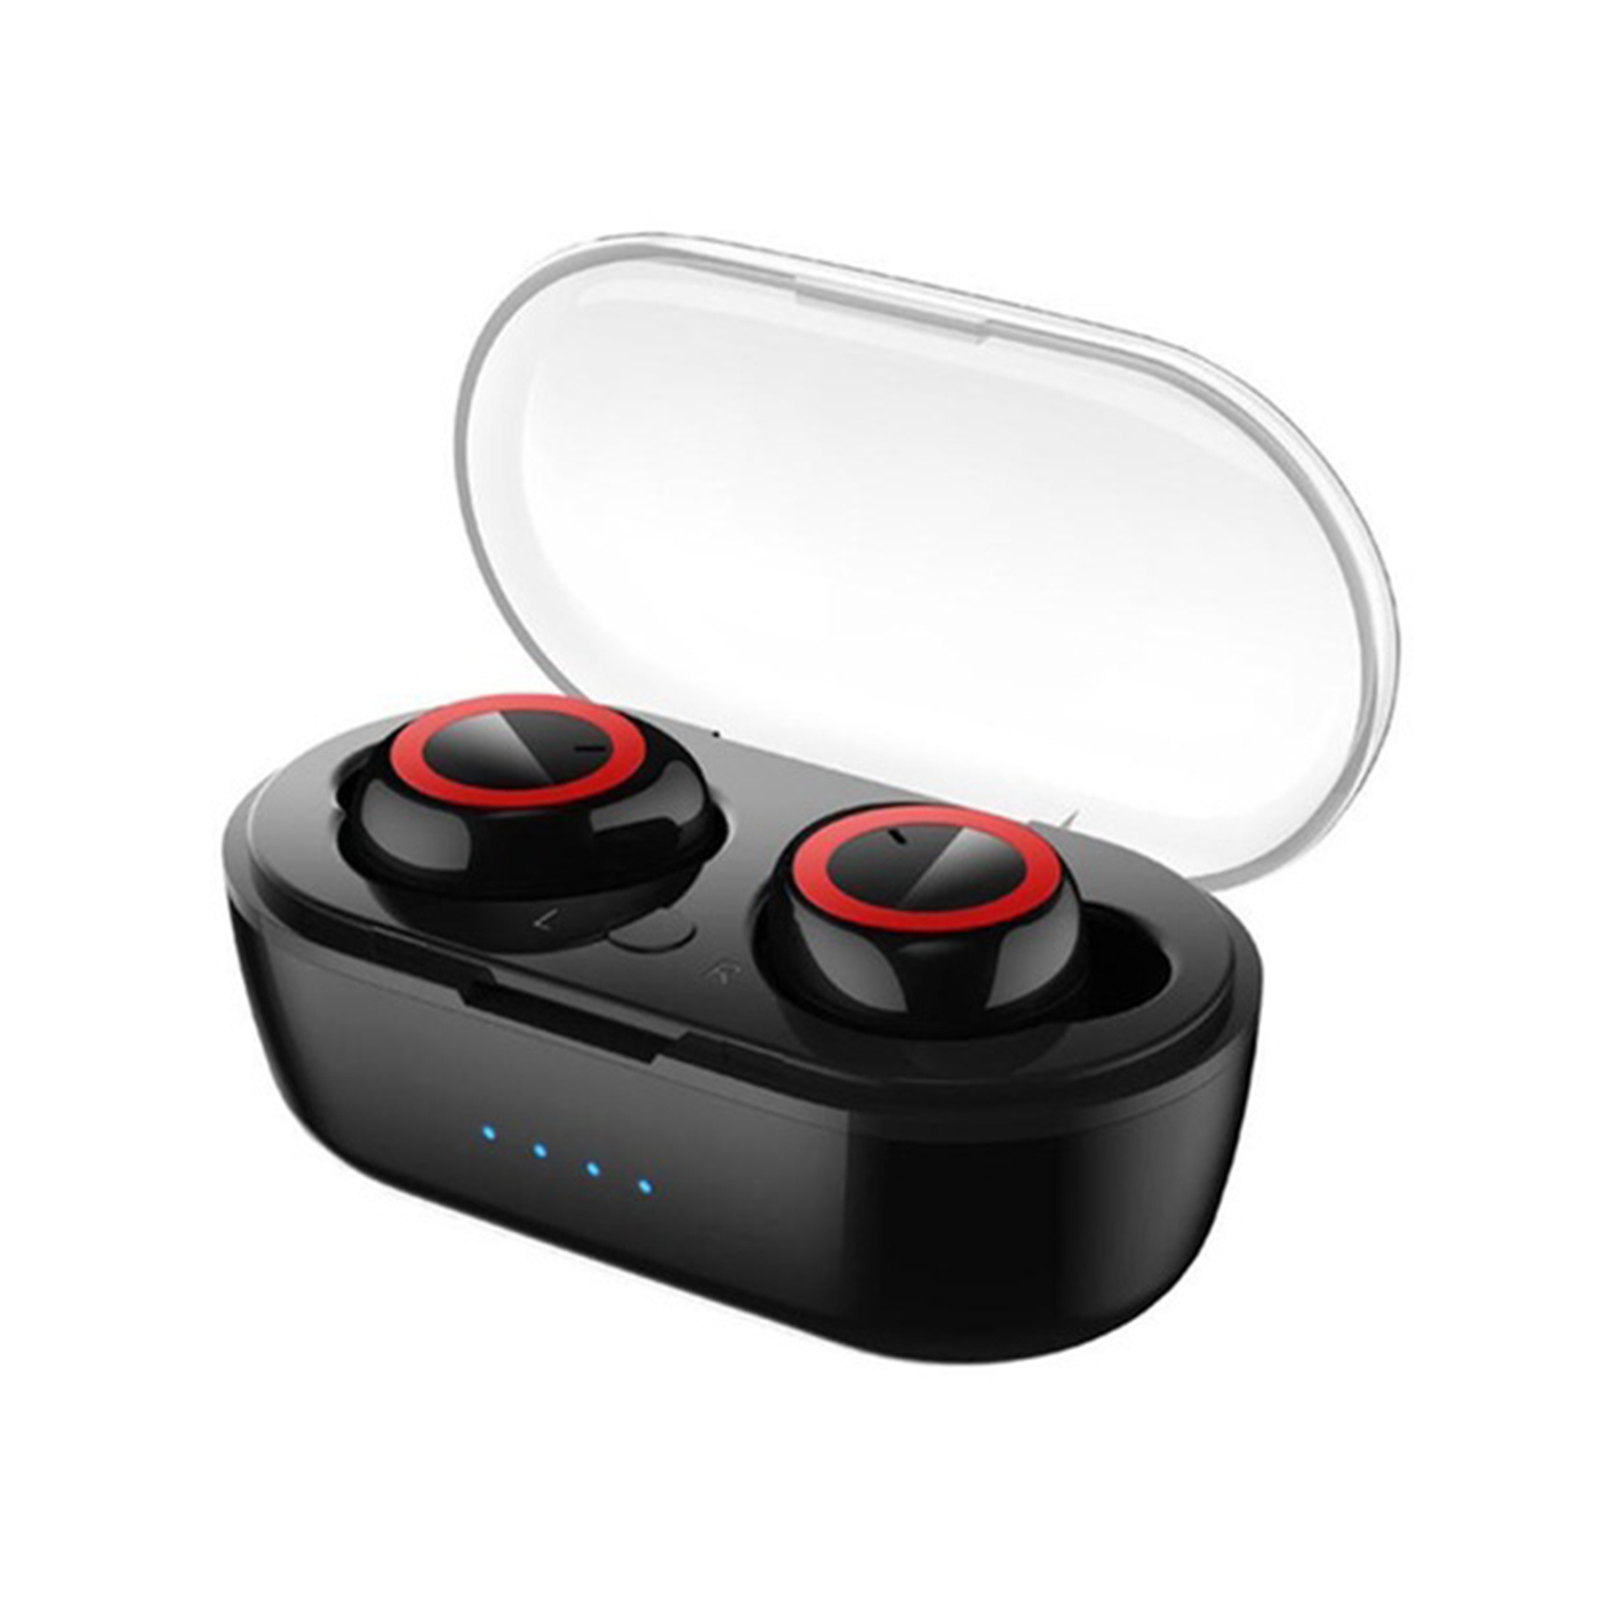 W12 Wireless Earbuds With Charging Case Headphones Noise Canceling Earphones For Sports Working Hiking Black-Red Circle Color Box